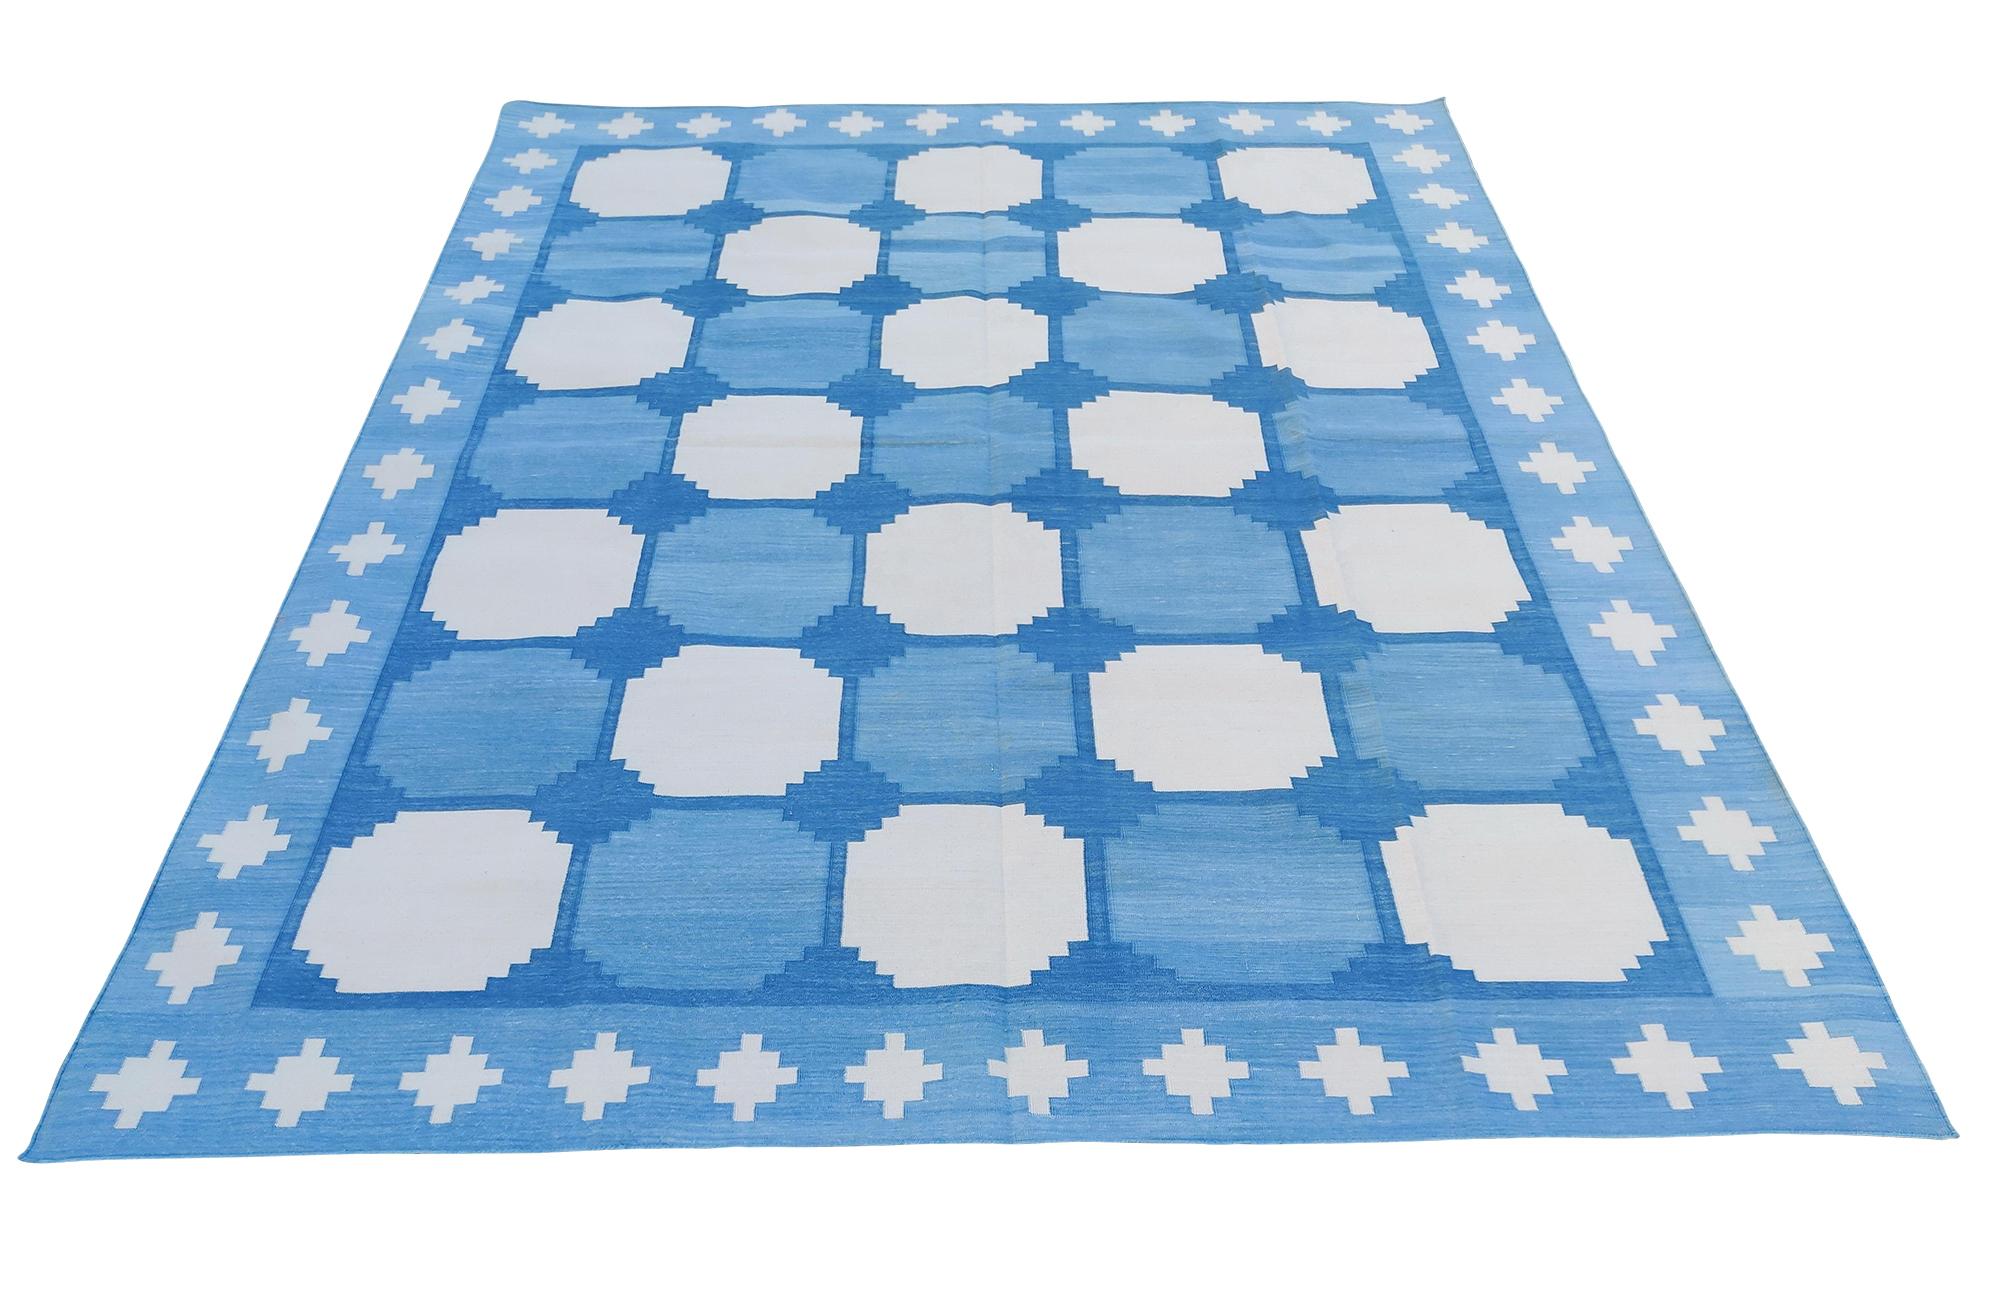 Cotton Natural Vegetable Dyed, Sky Blue And Cream Tile Patterned Indian Rug-9'x12'
These special flat-weave dhurries are hand-woven with 15 ply 100% cotton yarn. Due to the special manufacturing techniques used to create our rugs, the size and color